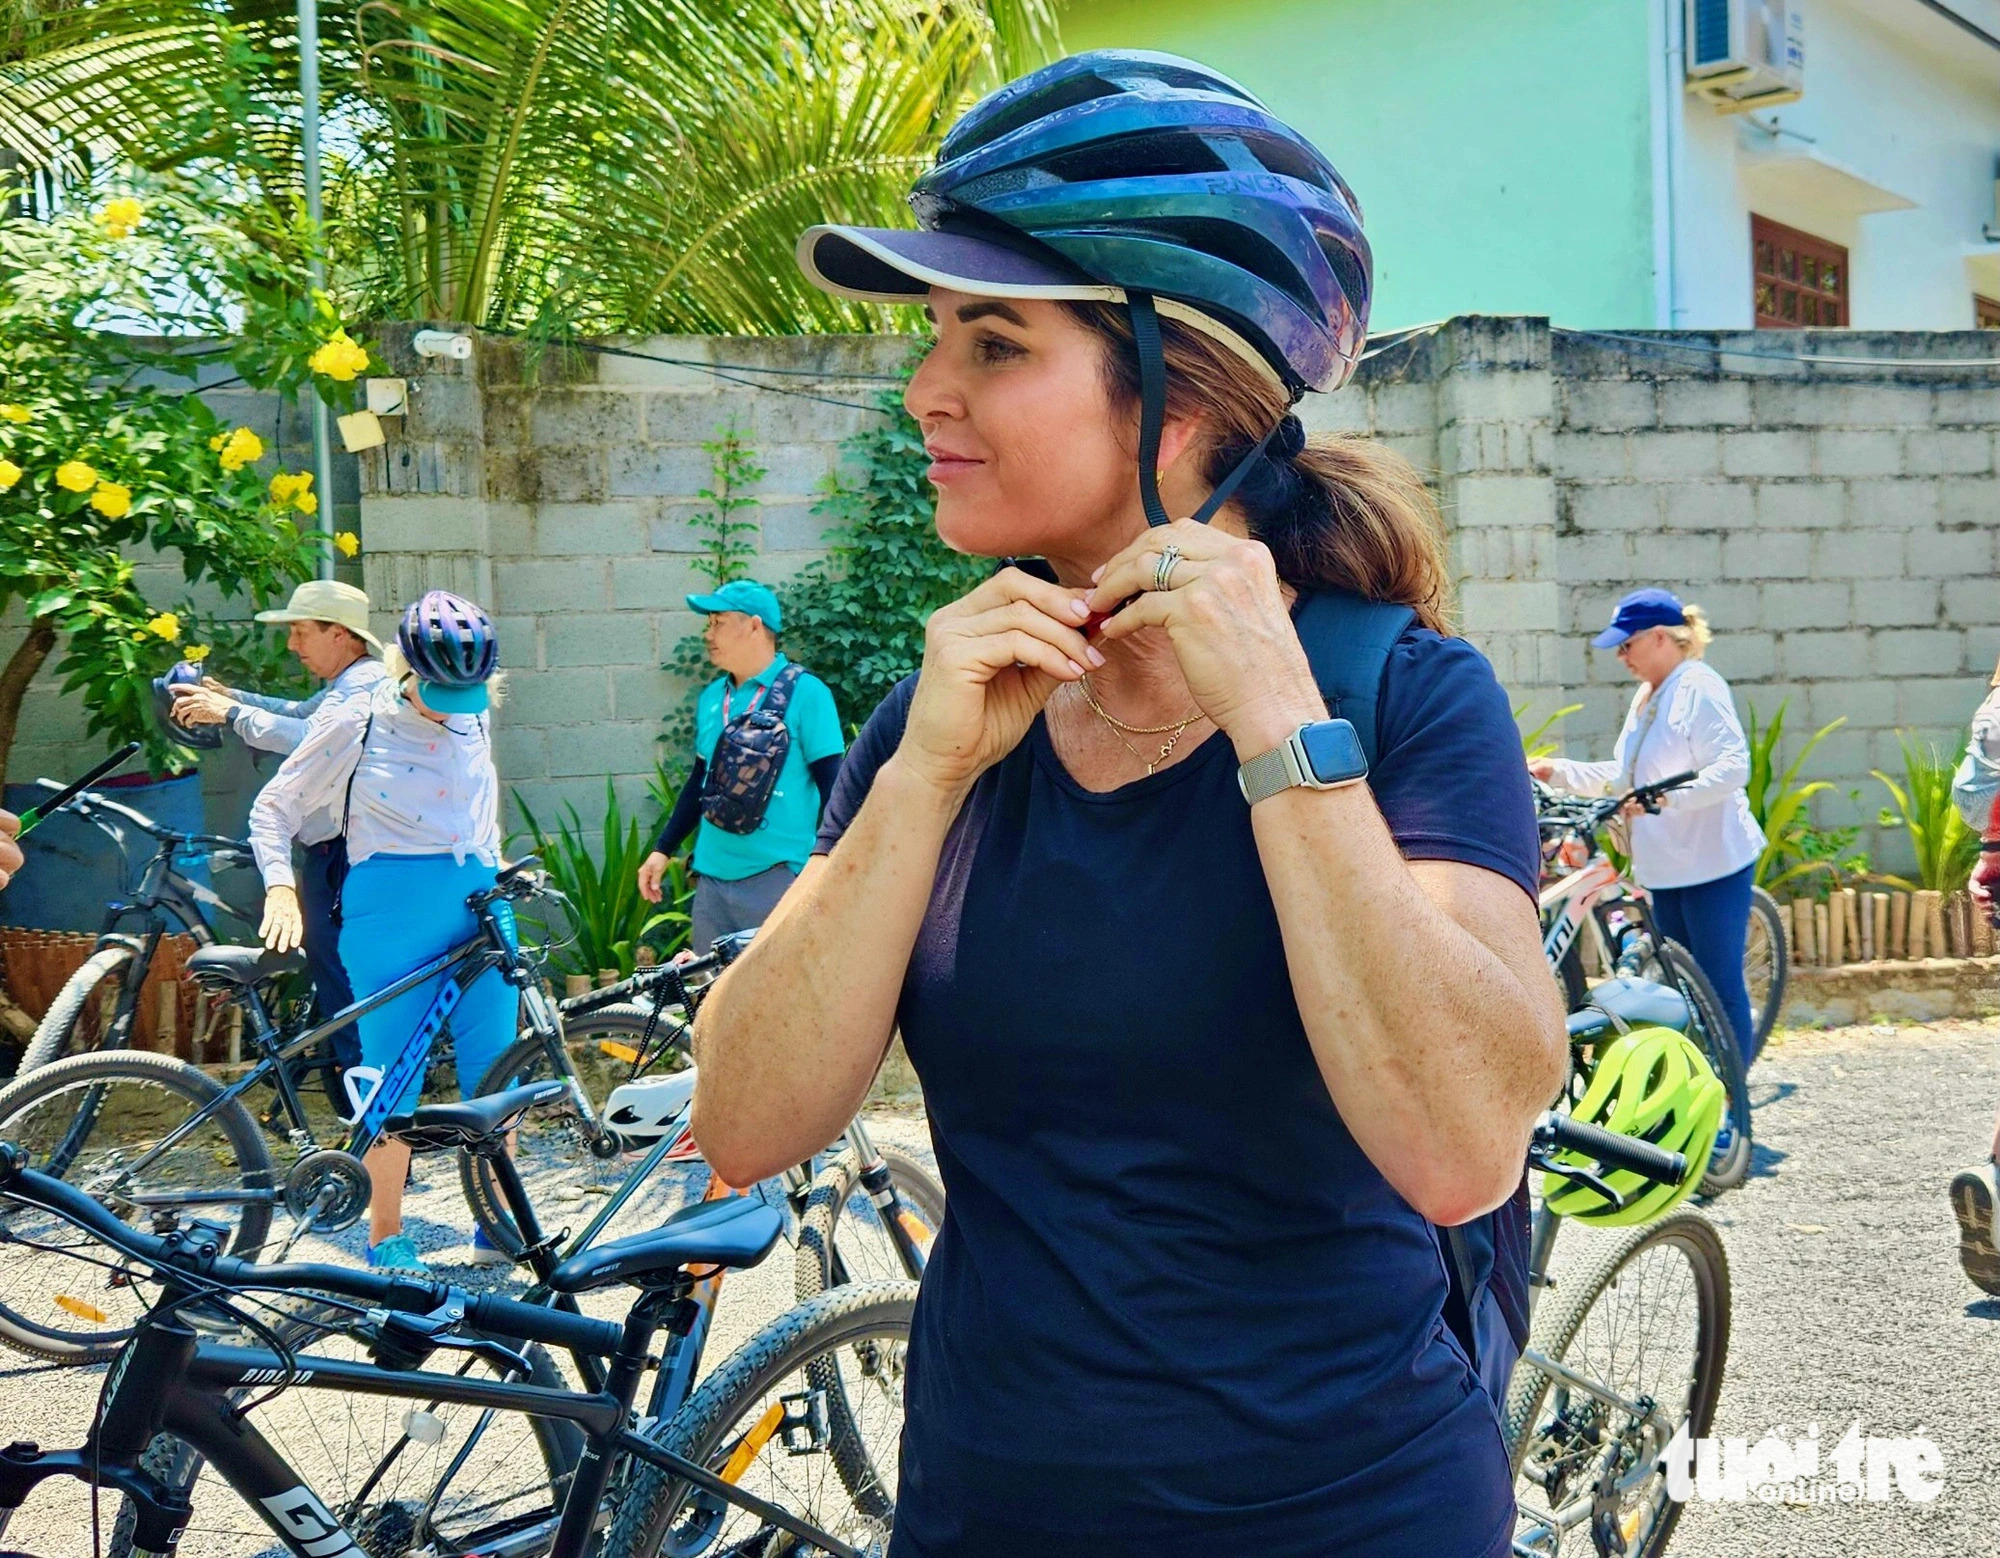 Lee Kreps, an American tourist, puts on a helmet before starting her bicycle tour of the countryside in Nha Trang City, Khanh Hoa Province, south-central Vietnam. Photo: Minh Chien / Tuoi Tre